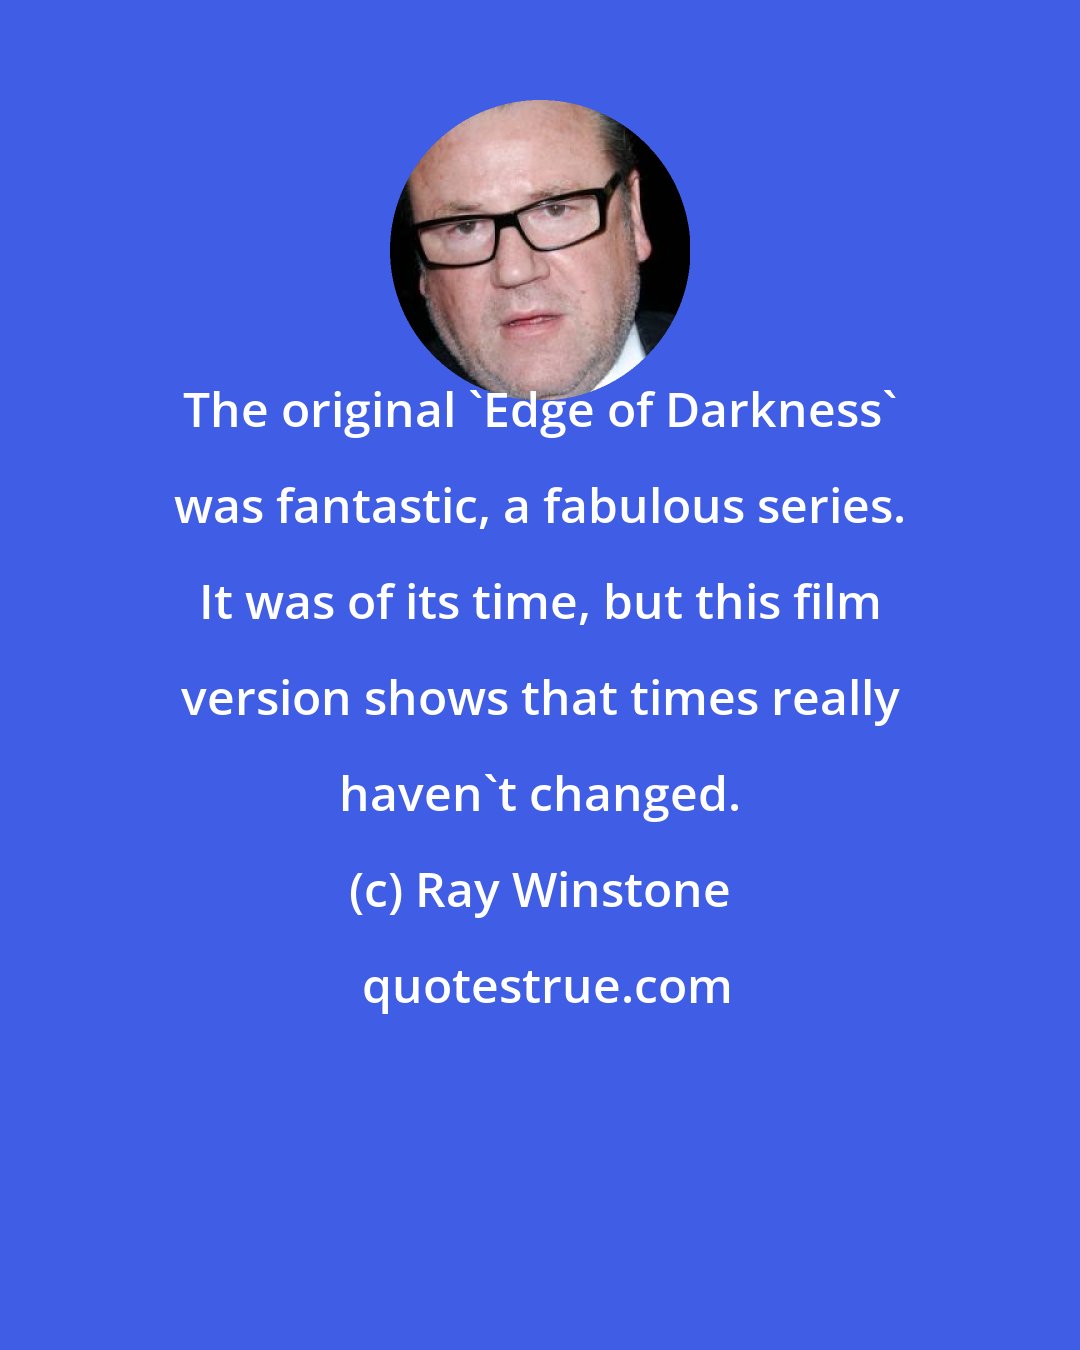 Ray Winstone: The original 'Edge of Darkness' was fantastic, a fabulous series. It was of its time, but this film version shows that times really haven't changed.